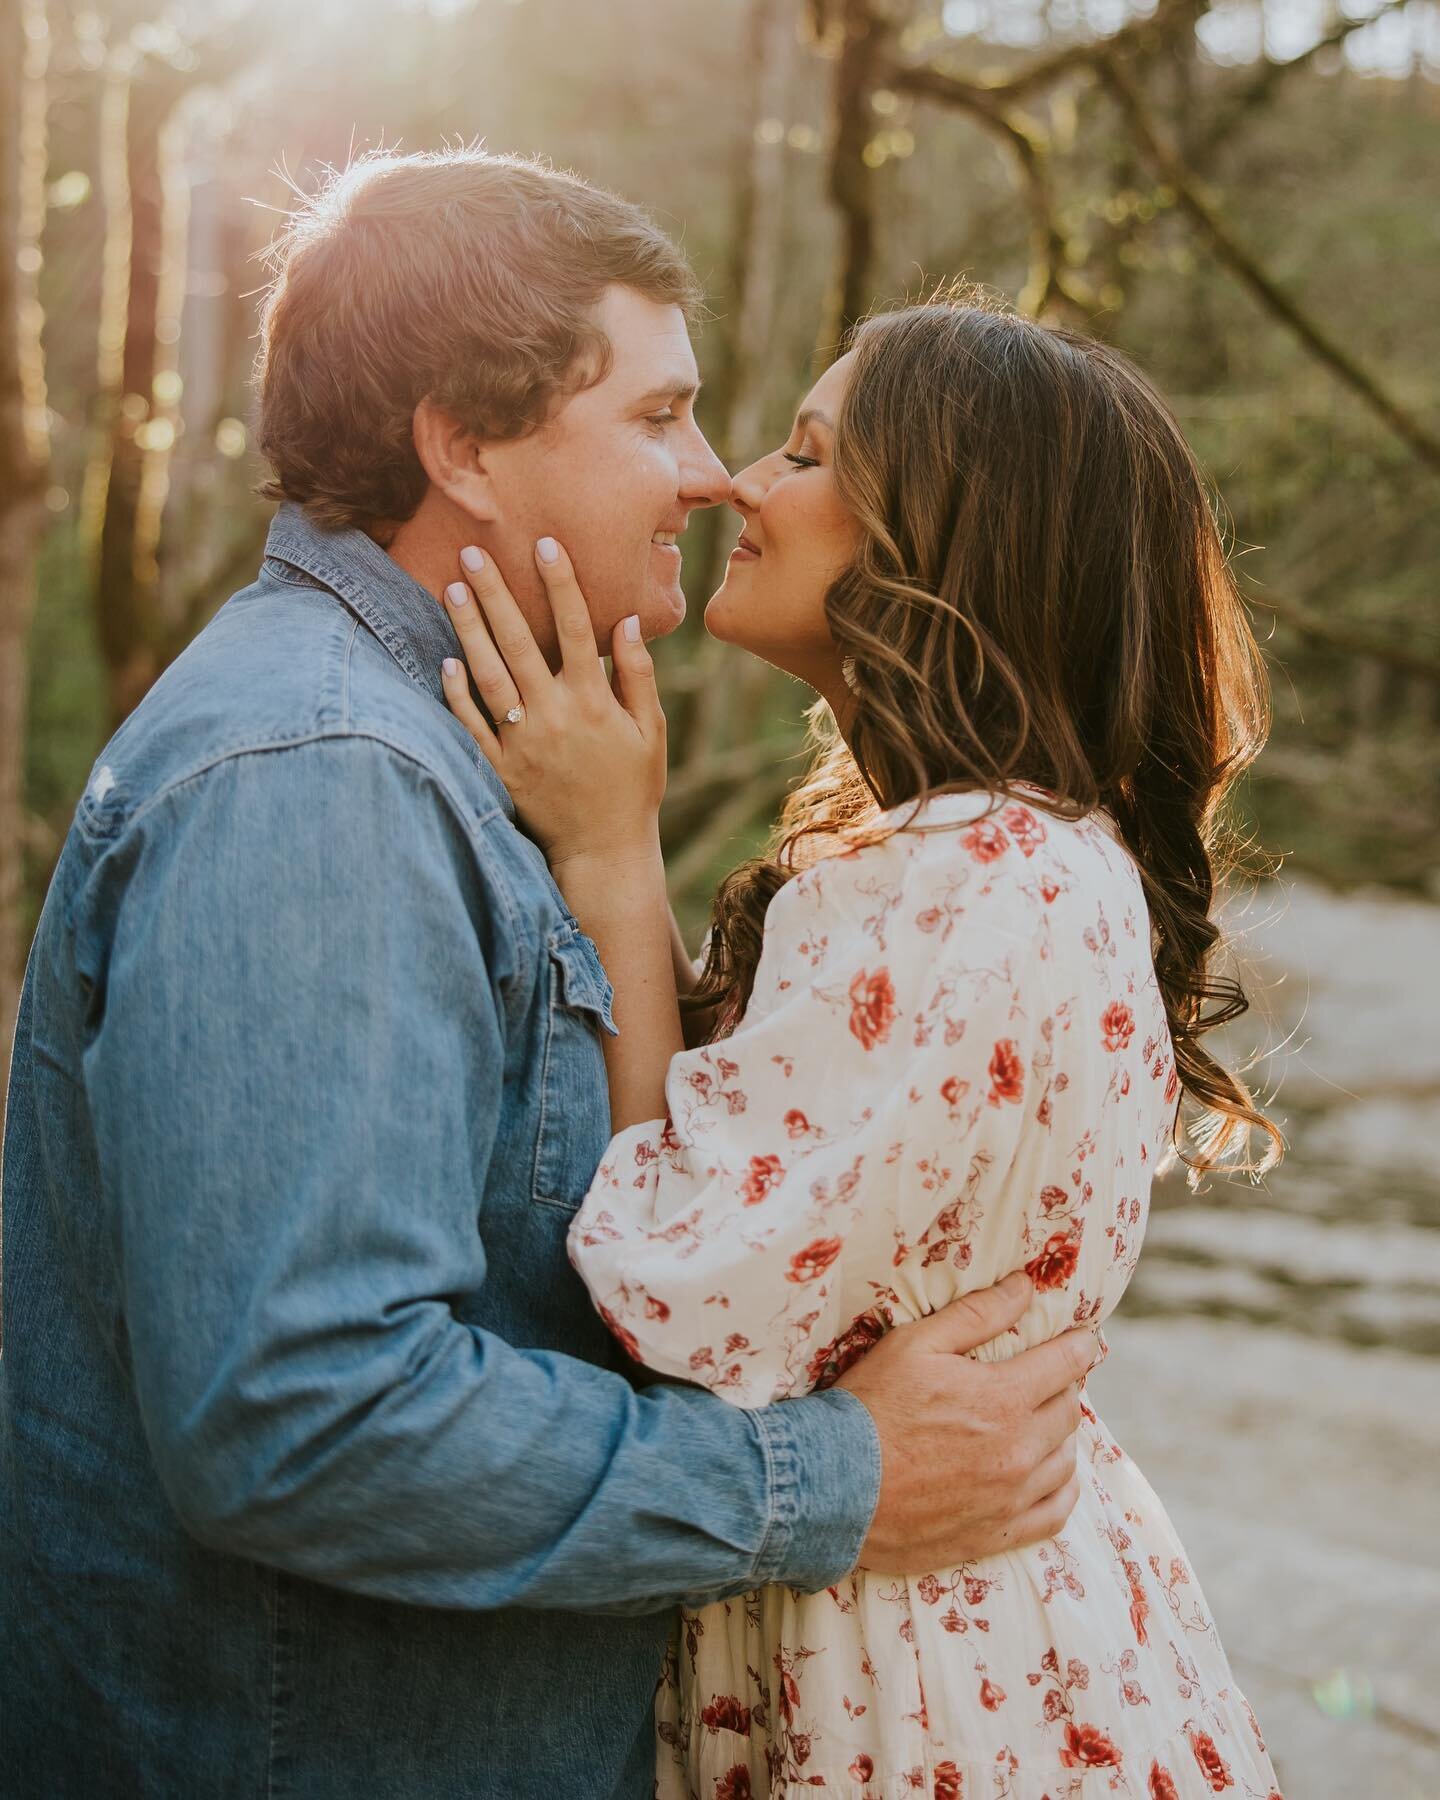 Keith &amp; Mackinzie&rsquo;s engagement session was one of my favorites from last year without a doubt. I will always be a sucker for a @freepeople dress! 🌺✨